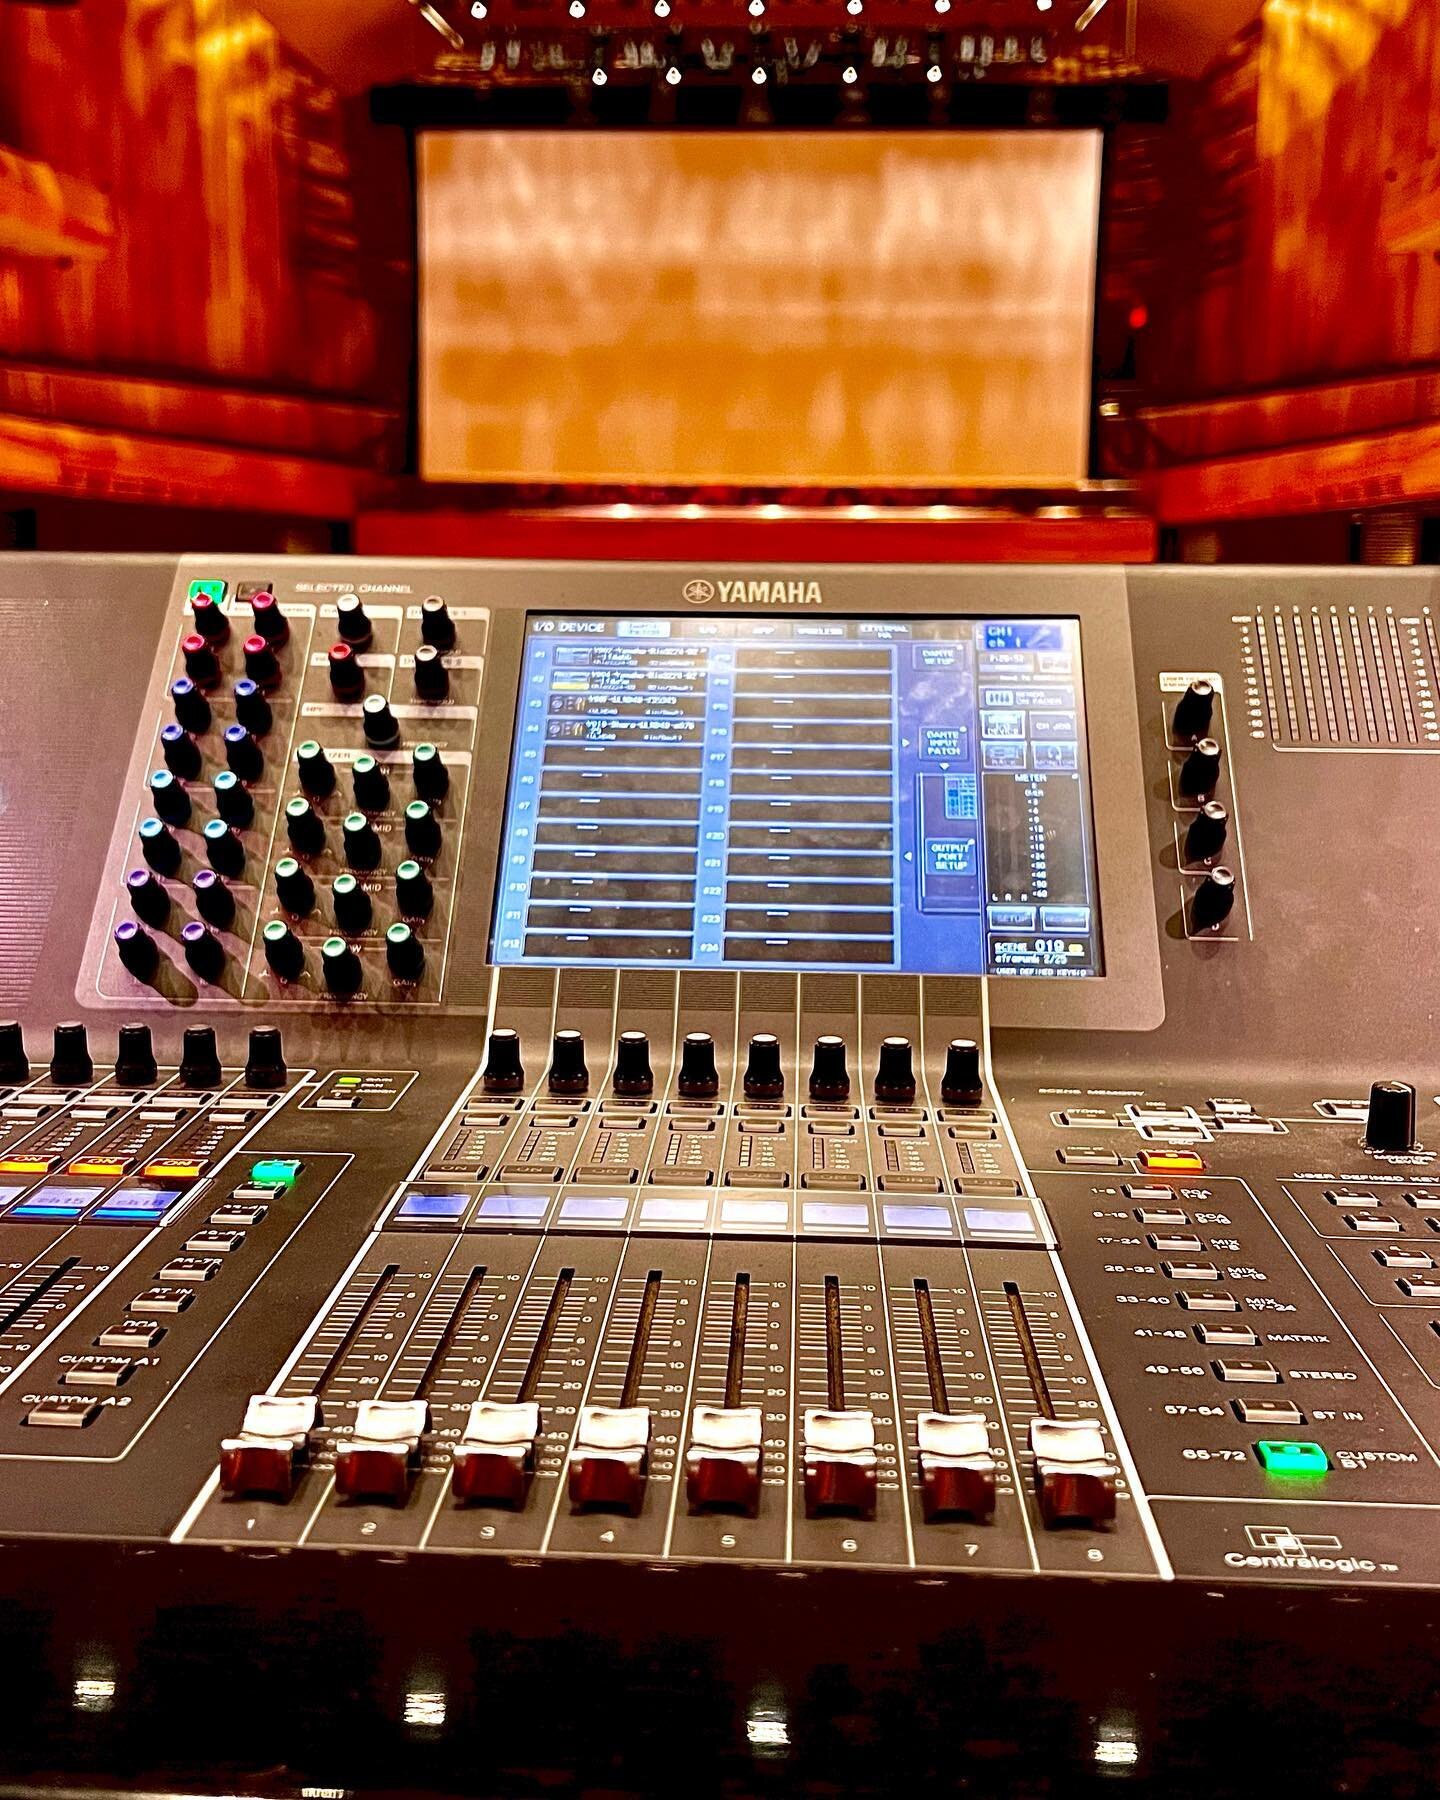 25 february 2023
david geffen hall, lincoln center, new york
⠀⠀⠀⠀⠀⠀⠀⠀⠀
back in action! after an extended break due to the broken hand, i&rsquo;m finally back behind a soundboard. at front of house today for the afro punk black herstory concert at dav